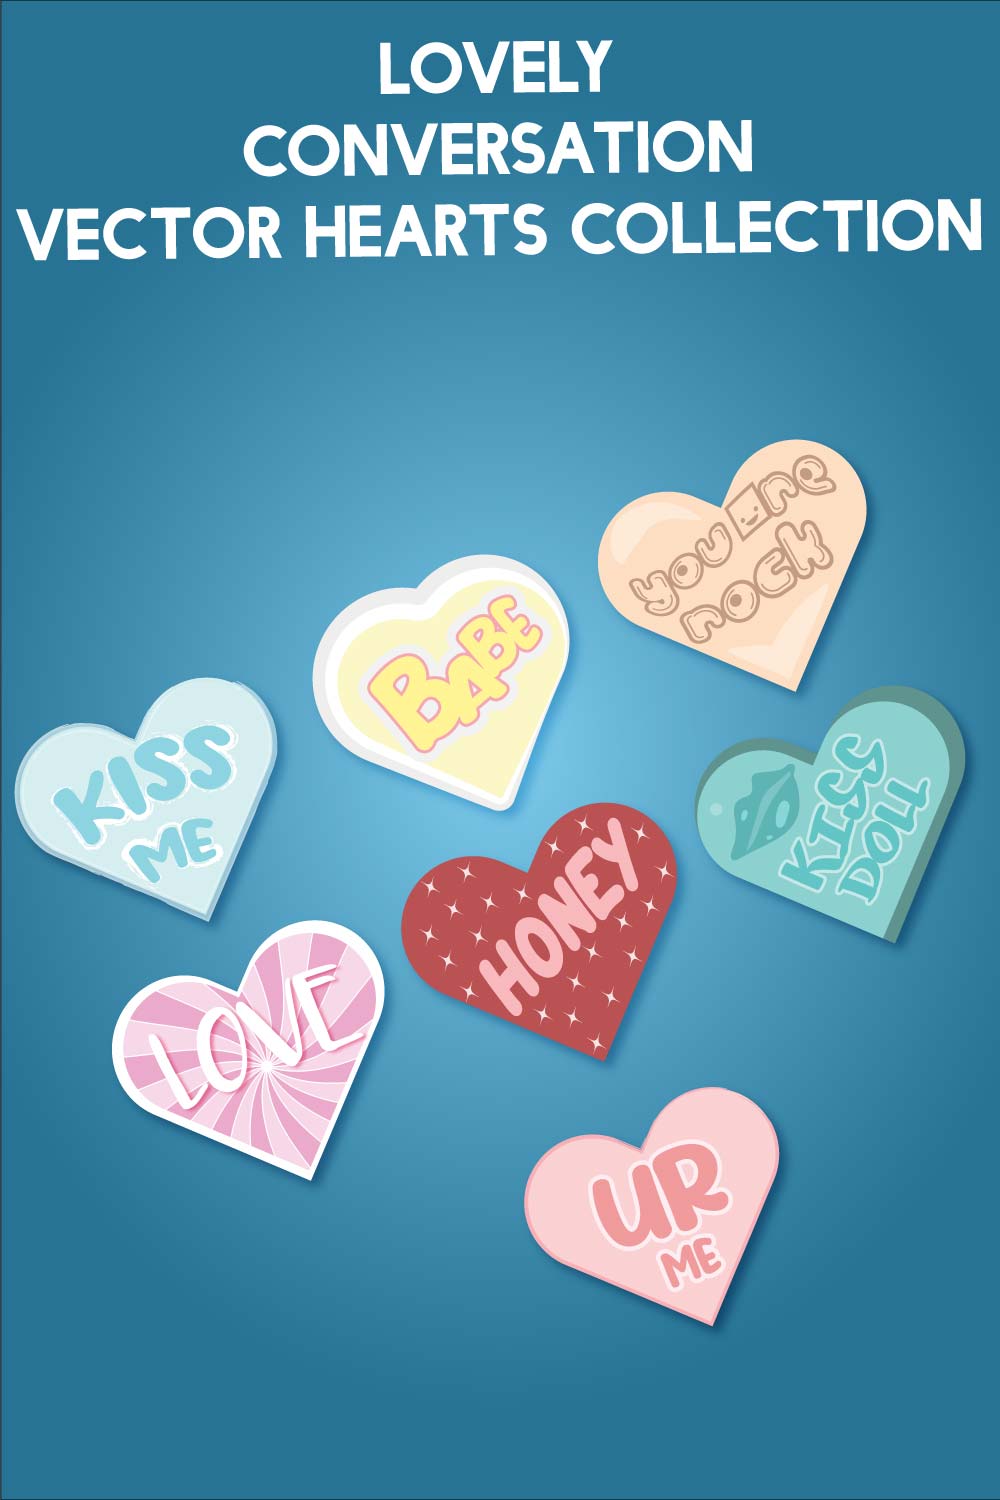 Lovely conversation vector hearts collection pinterest preview image.